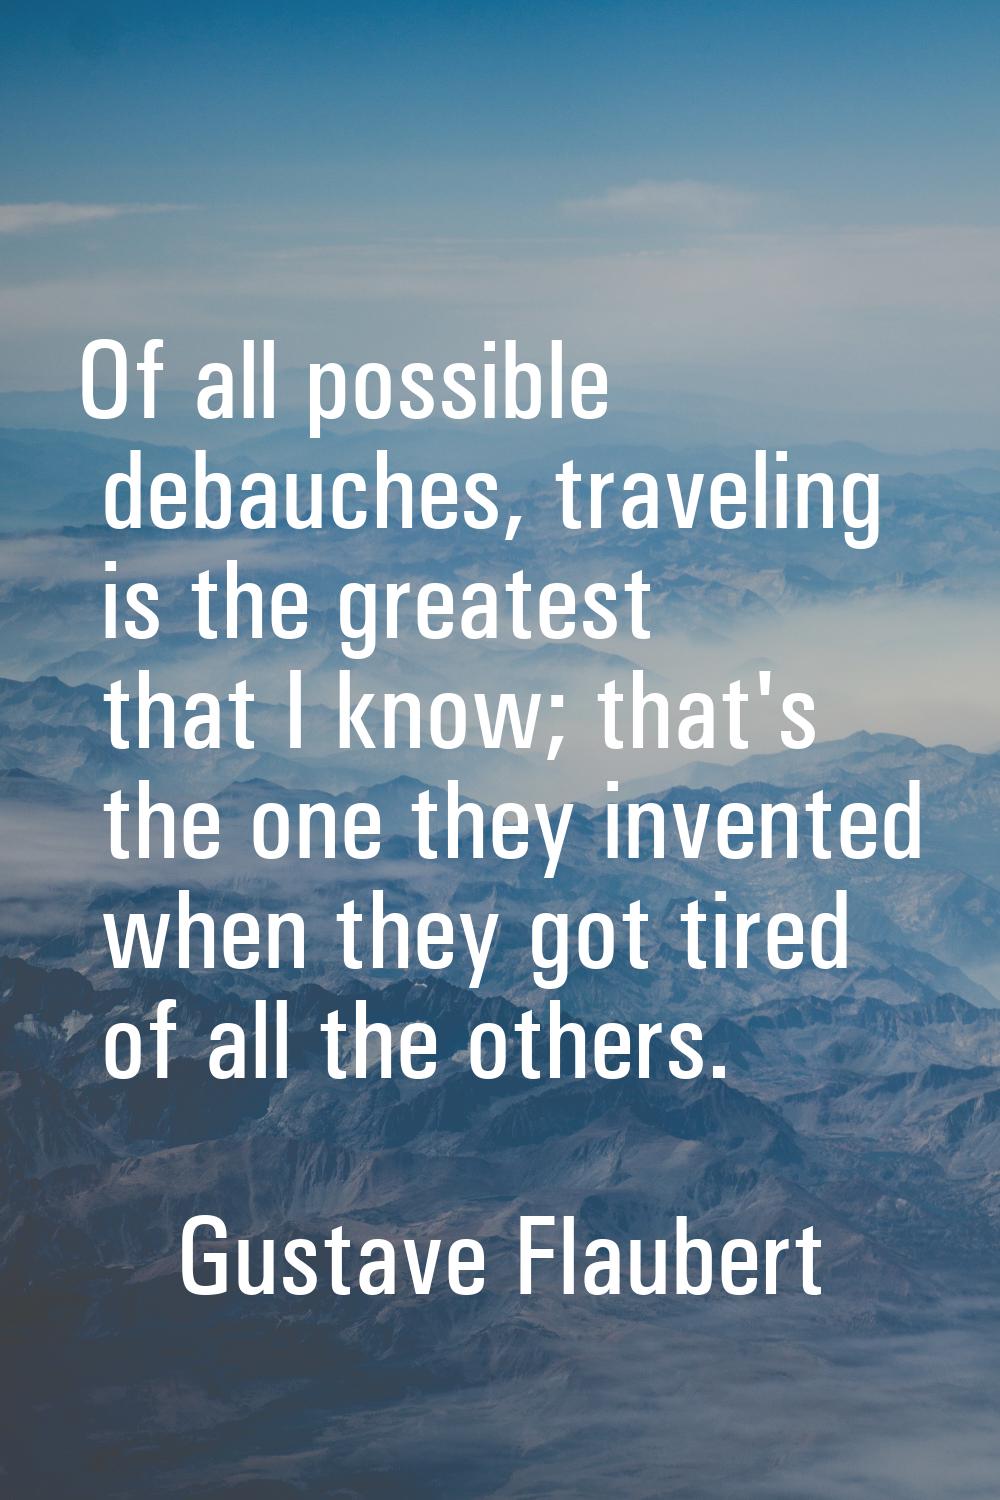 Of all possible debauches, traveling is the greatest that I know; that's the one they invented when